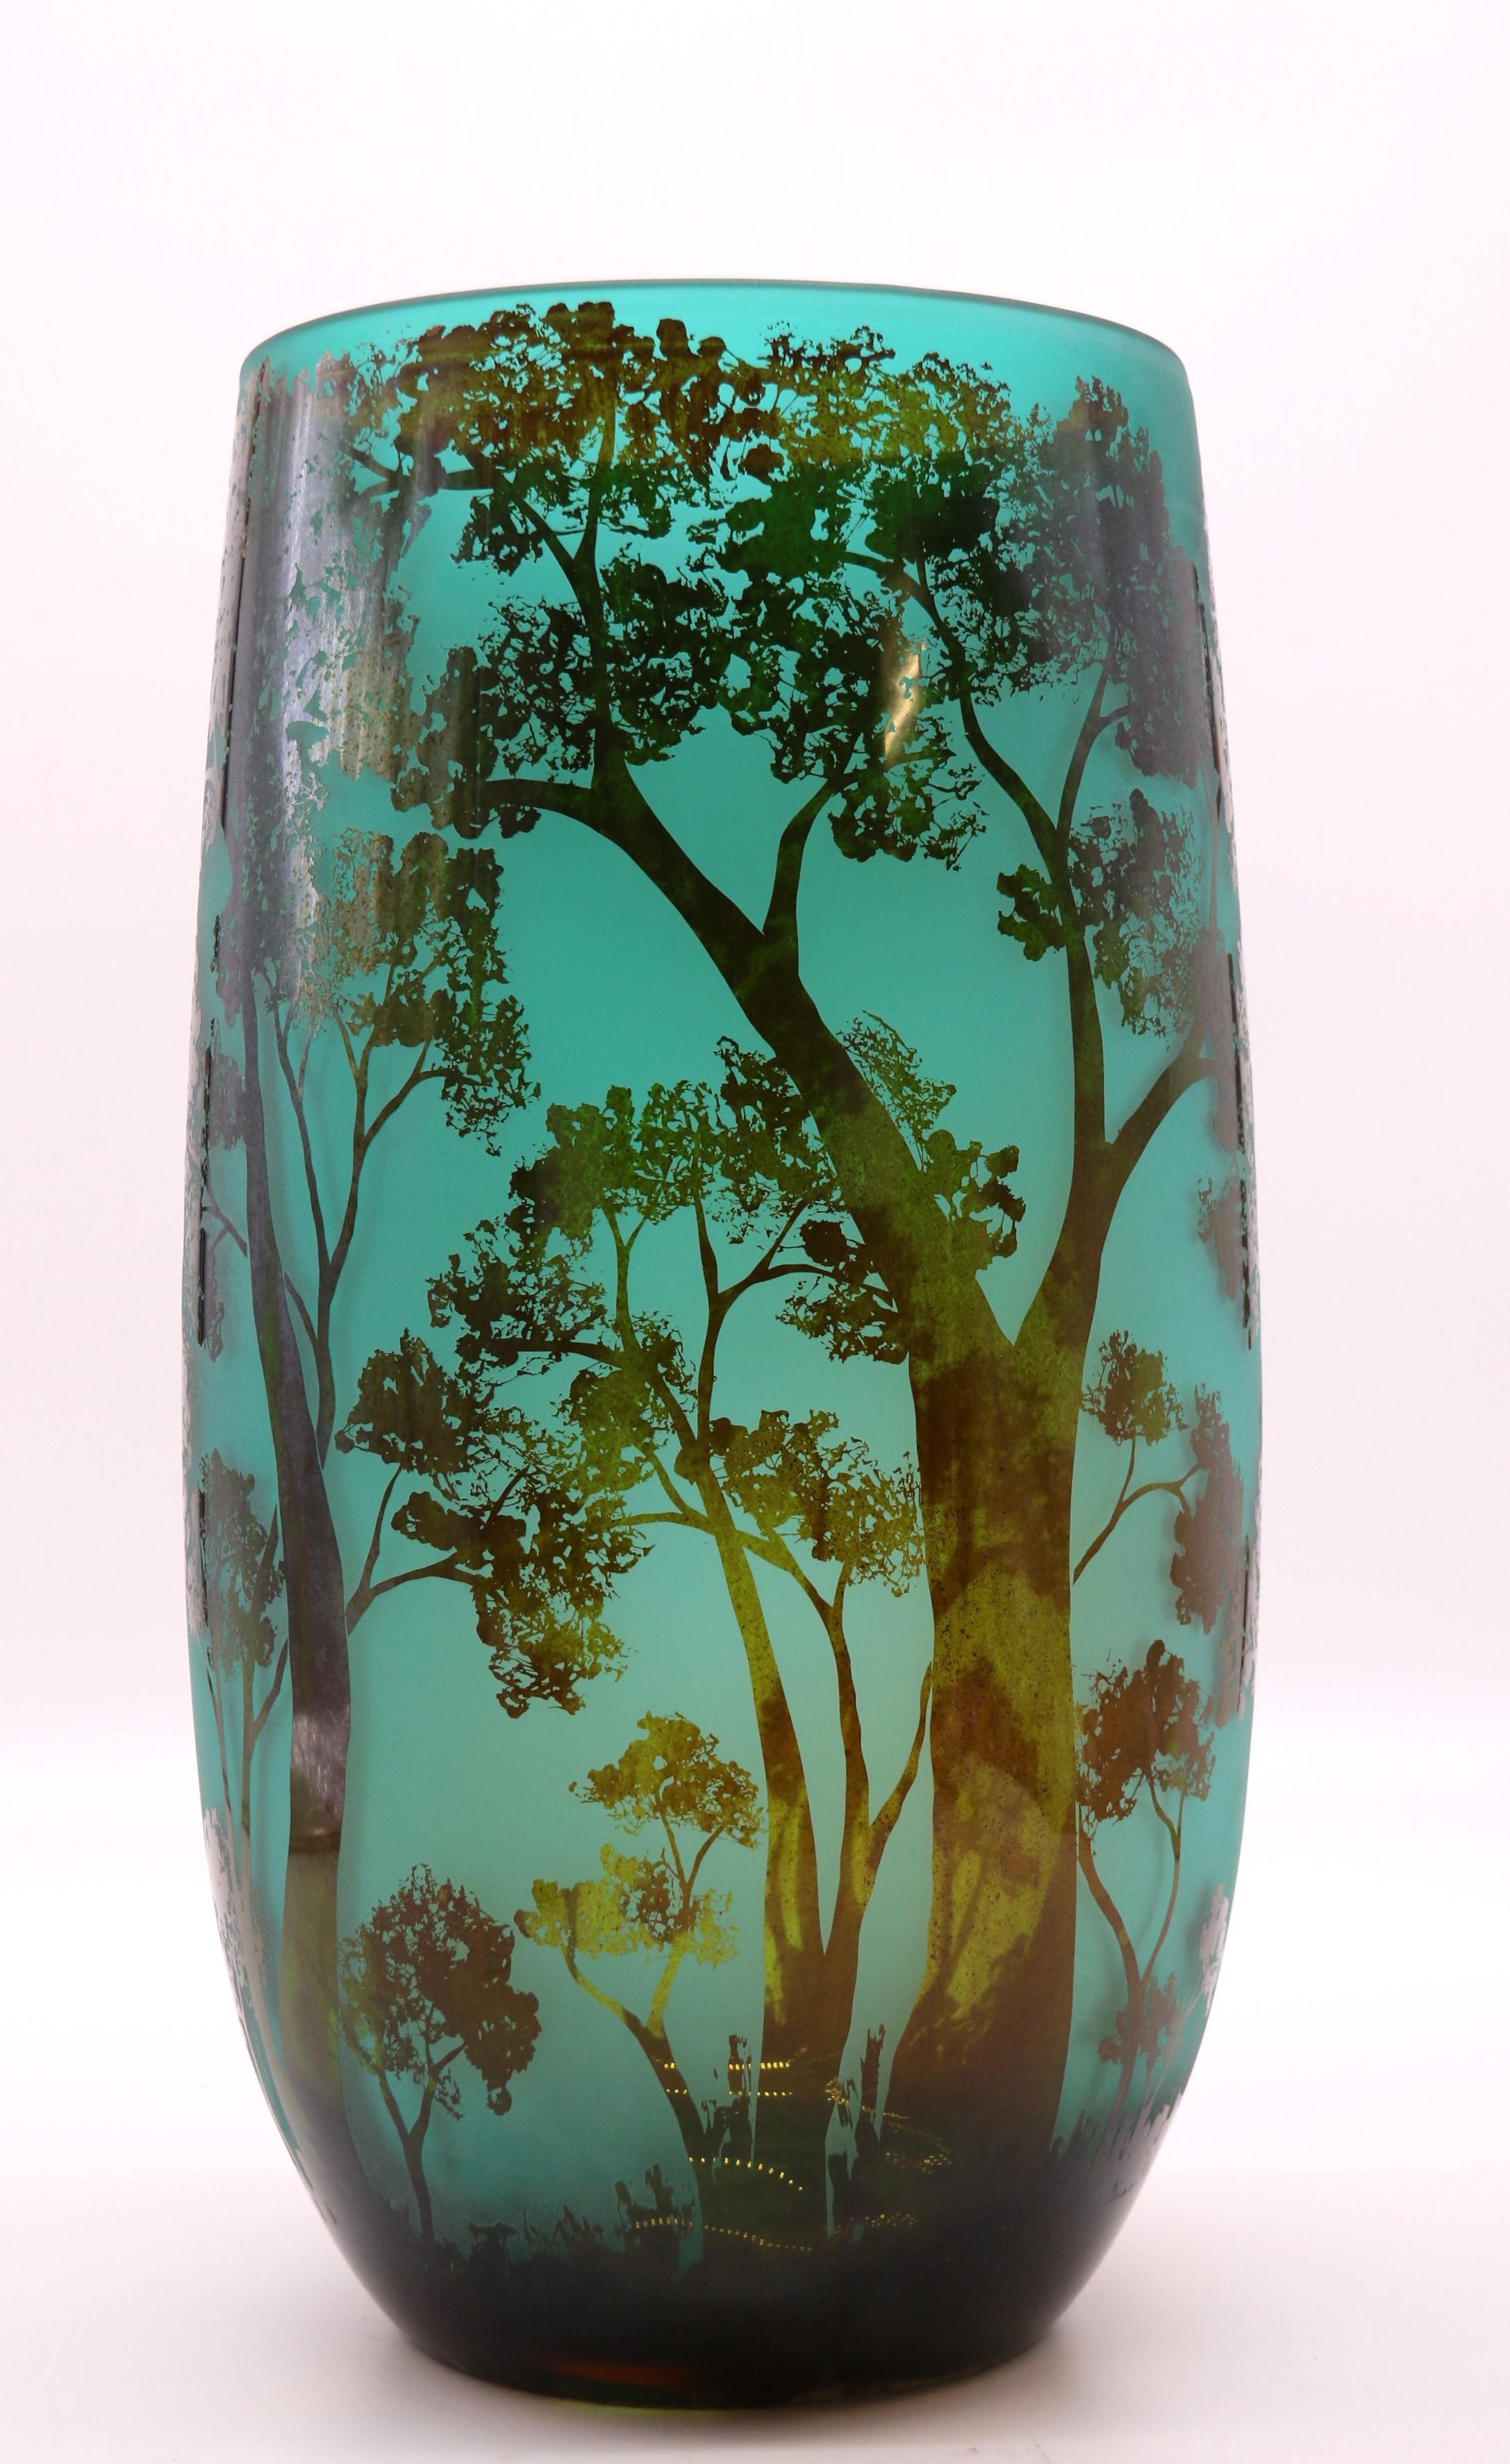 A large 20th century cameo glass vase decorated with an intricate woodland scene 2